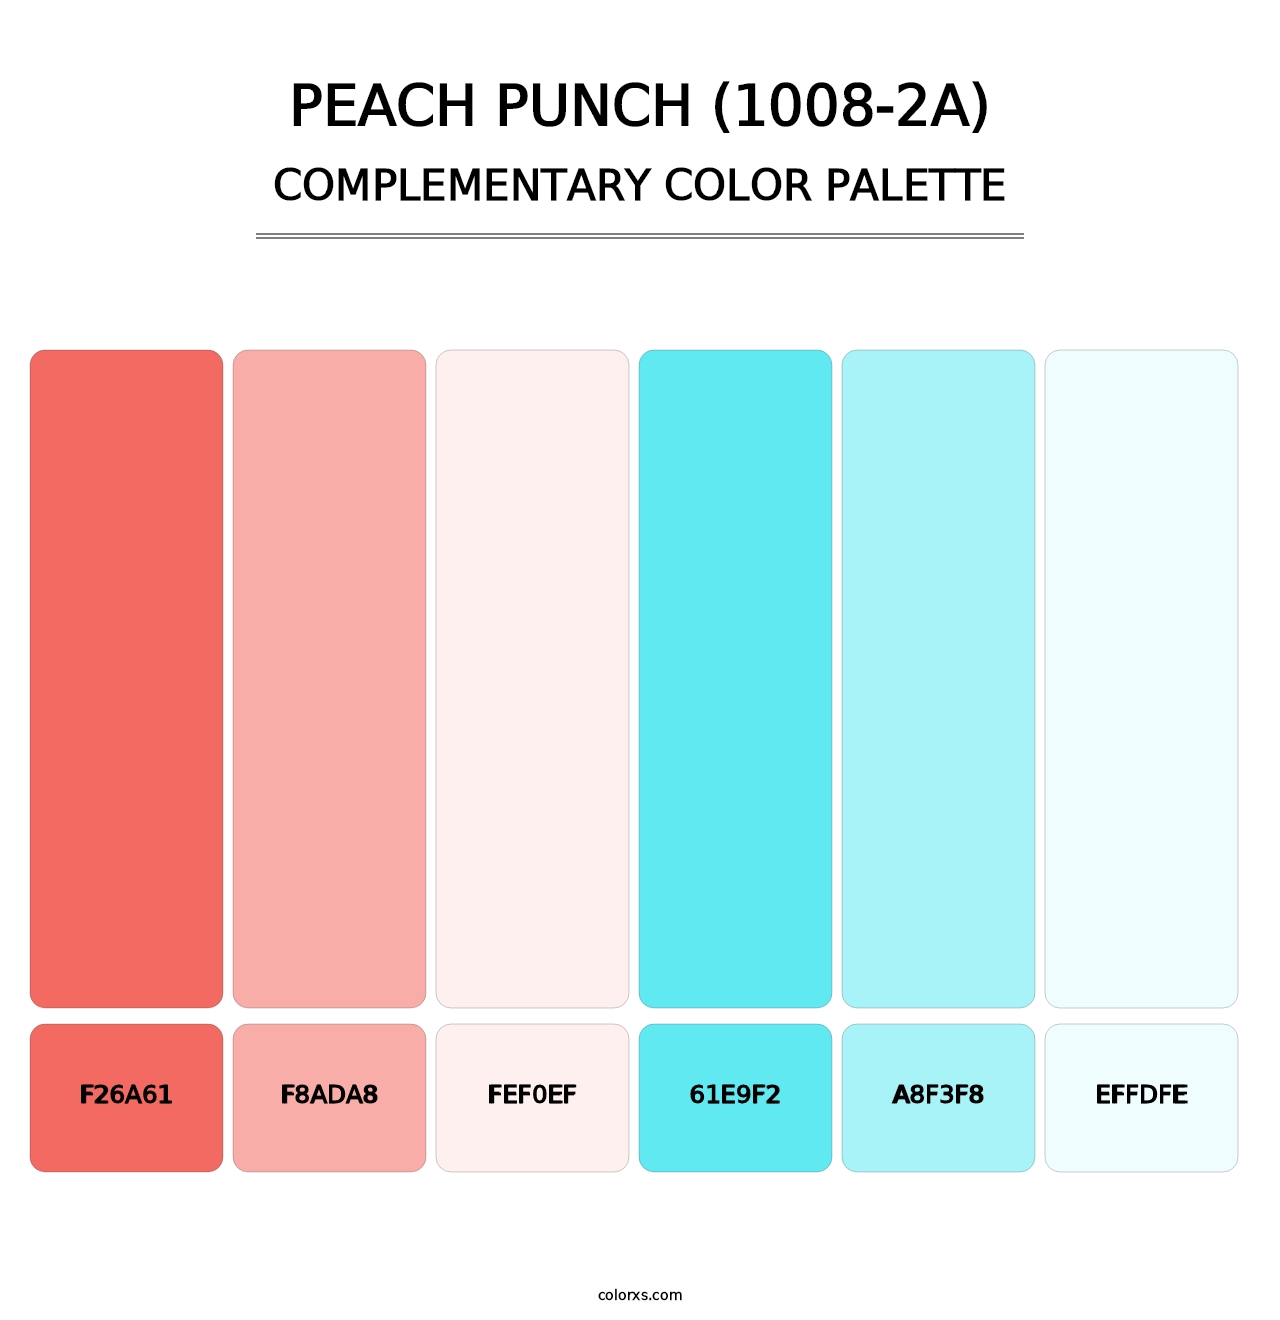 Peach Punch (1008-2A) - Complementary Color Palette